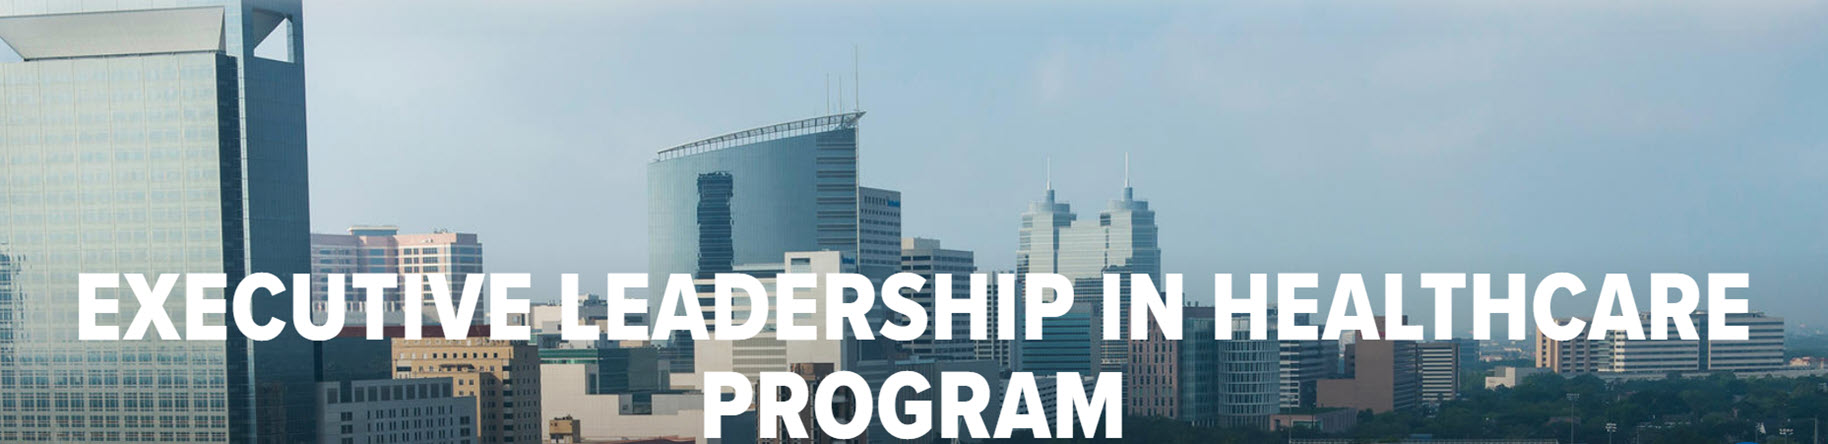 Executive Leadership in Healthcare Program: A Collaboration Between Rice University and MD Anderson Cancer Center Banner